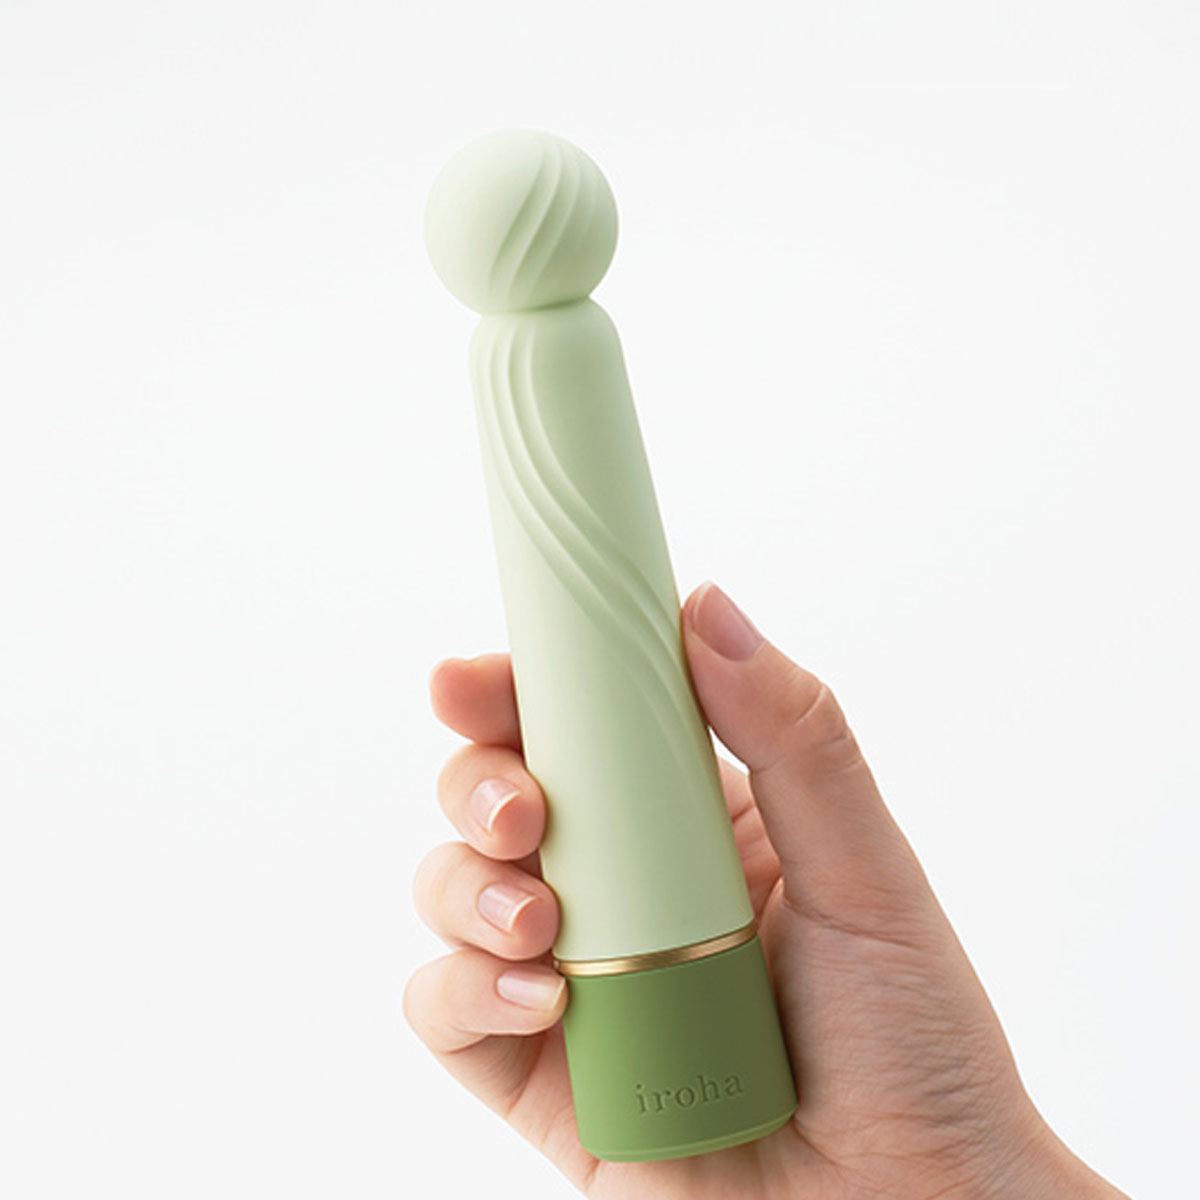 Hand holding a green silicone g-spot vibrator with squishy flexible ball at the top Nudie Co